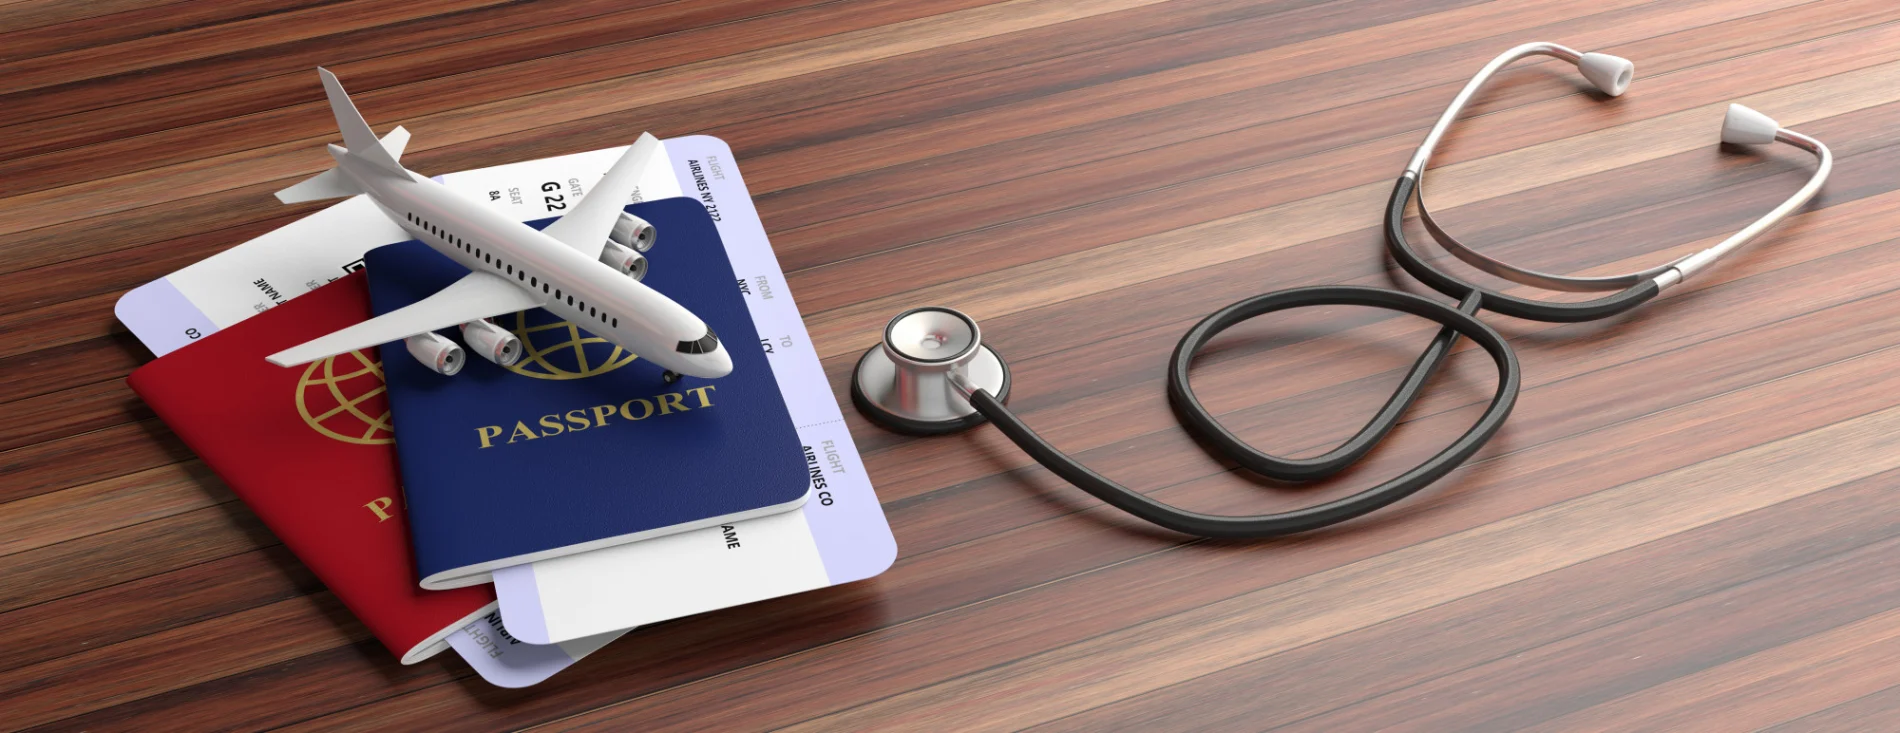 Essential travel items for having healthcare abroad.